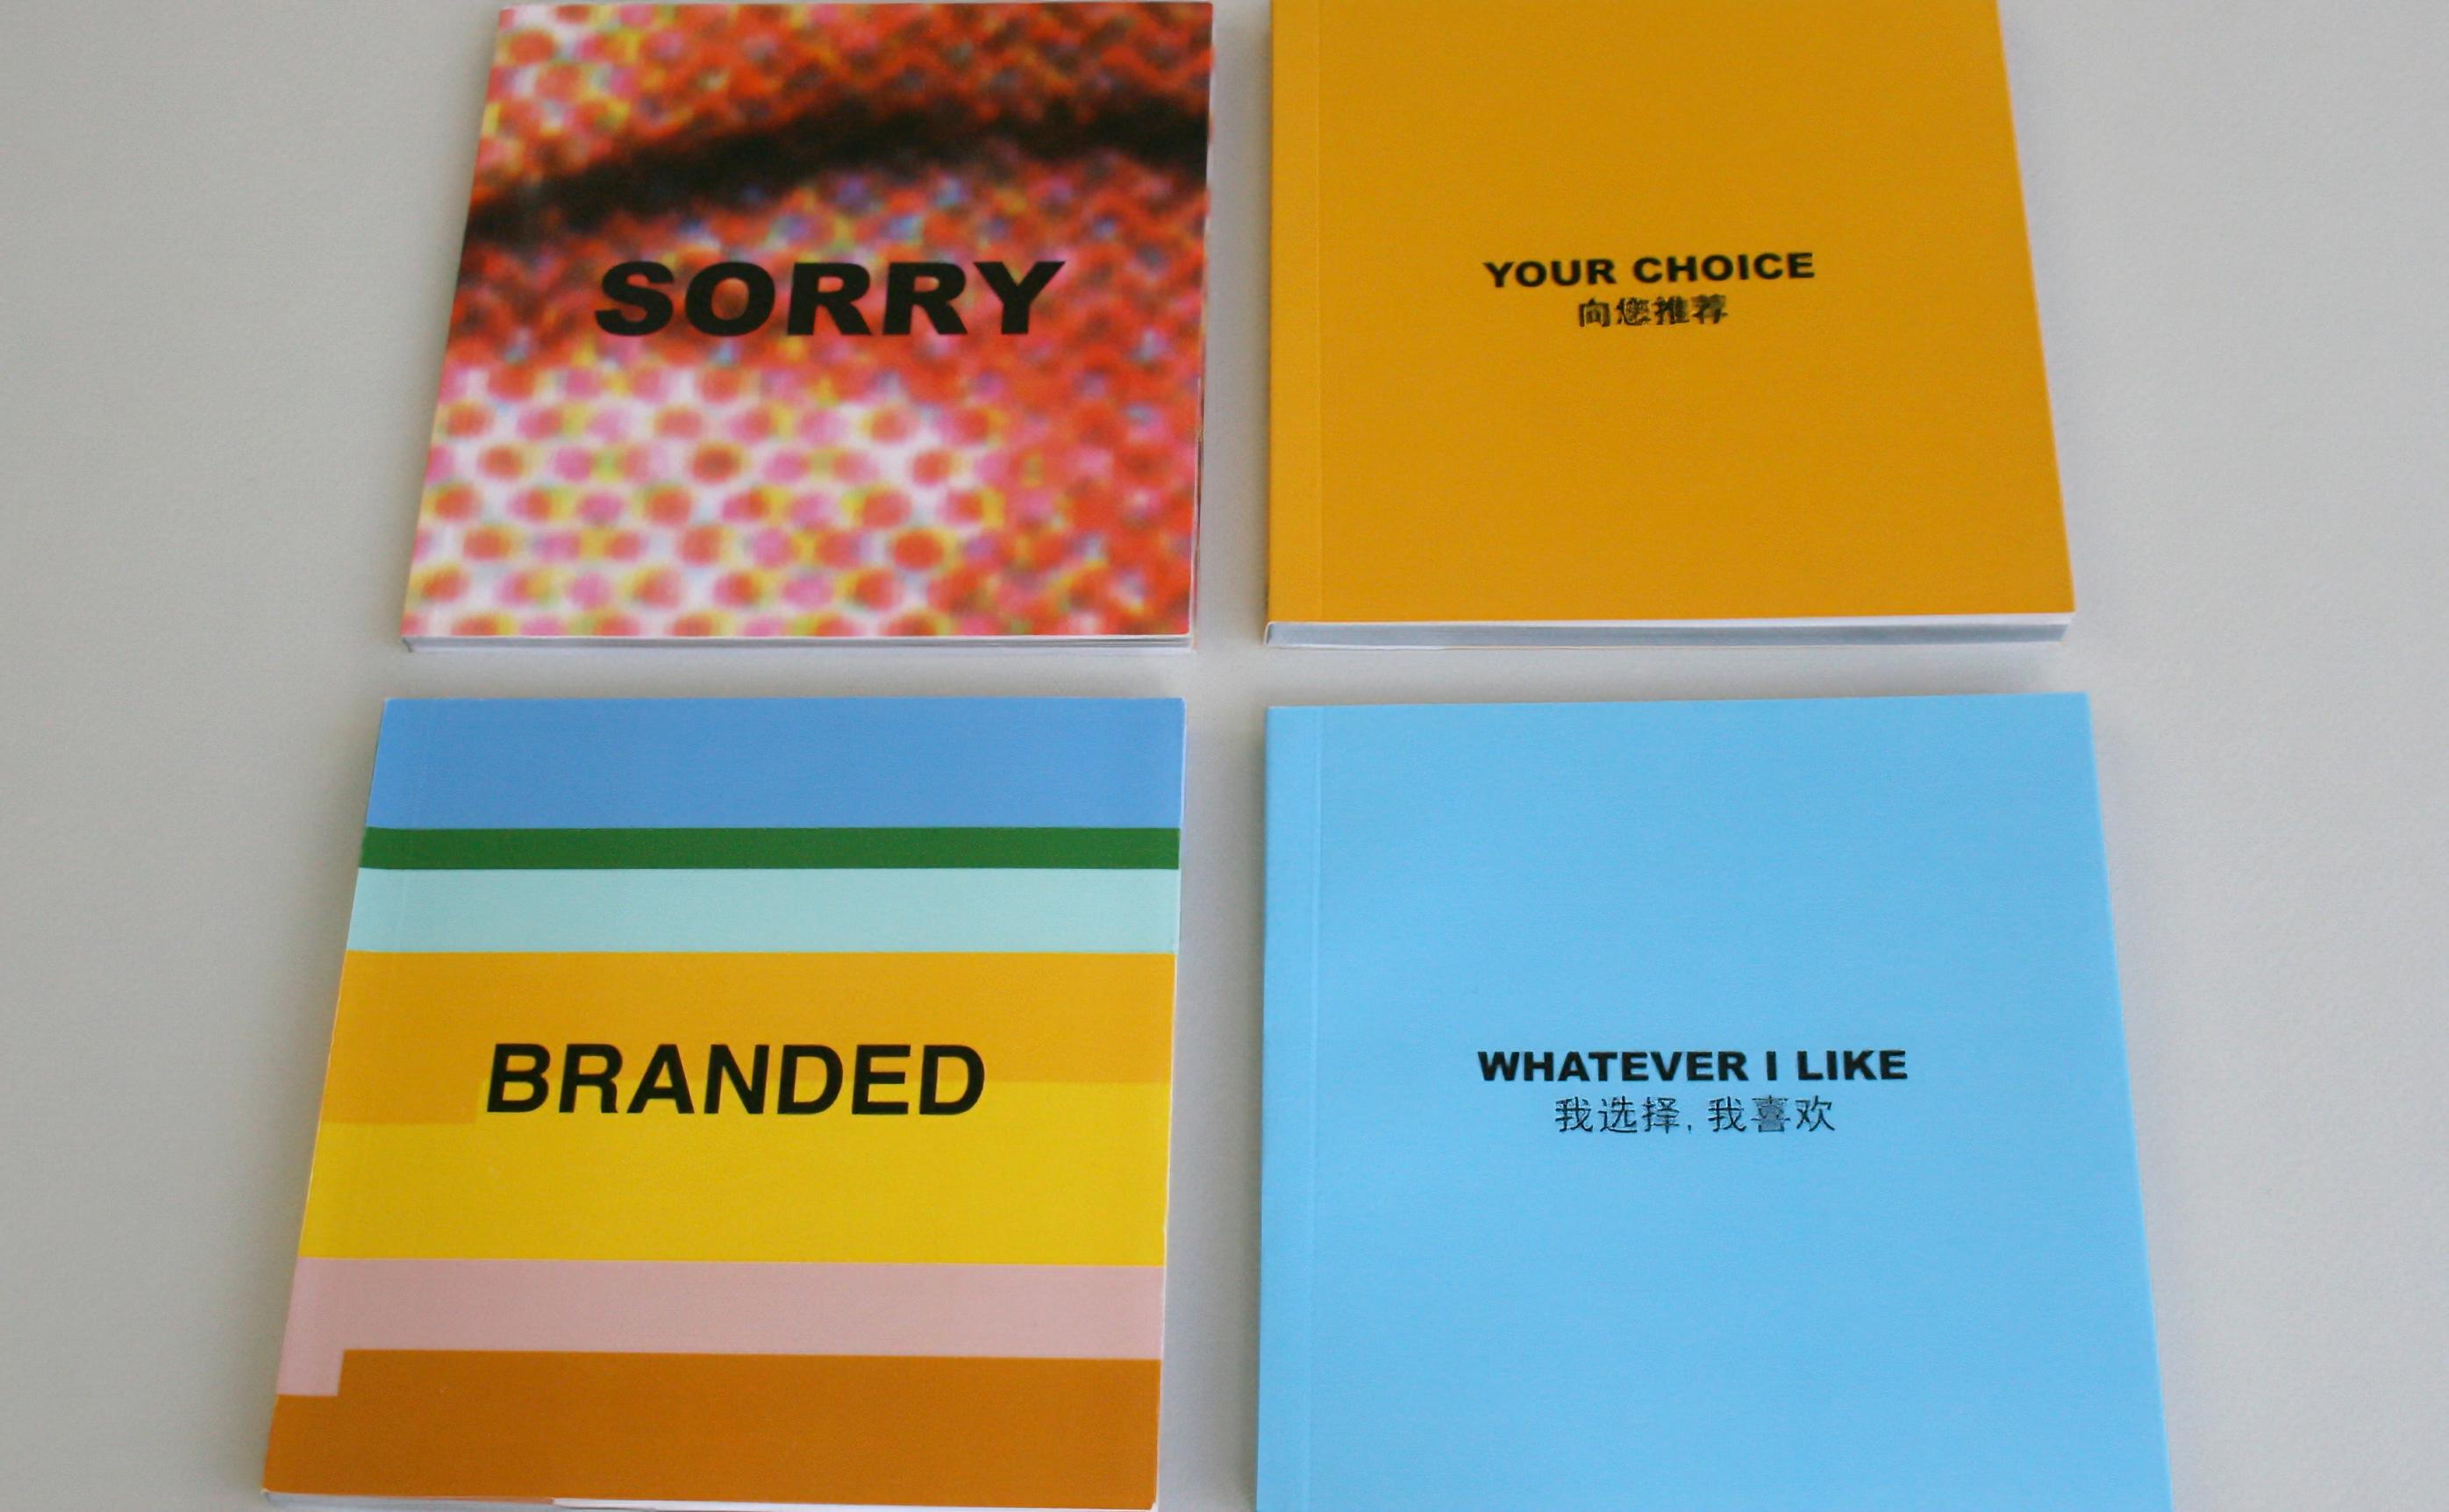 Sorry, 2nd edition, SMU Art Gallery, Halifax, 2008; Your Choice, Pickled Art Centre, Beijing, 2008; Branded, University of Waterloo Art Gallery, Canada, 2008; Whatever I Like, Pickled Art Centre, Beijing, 2007.